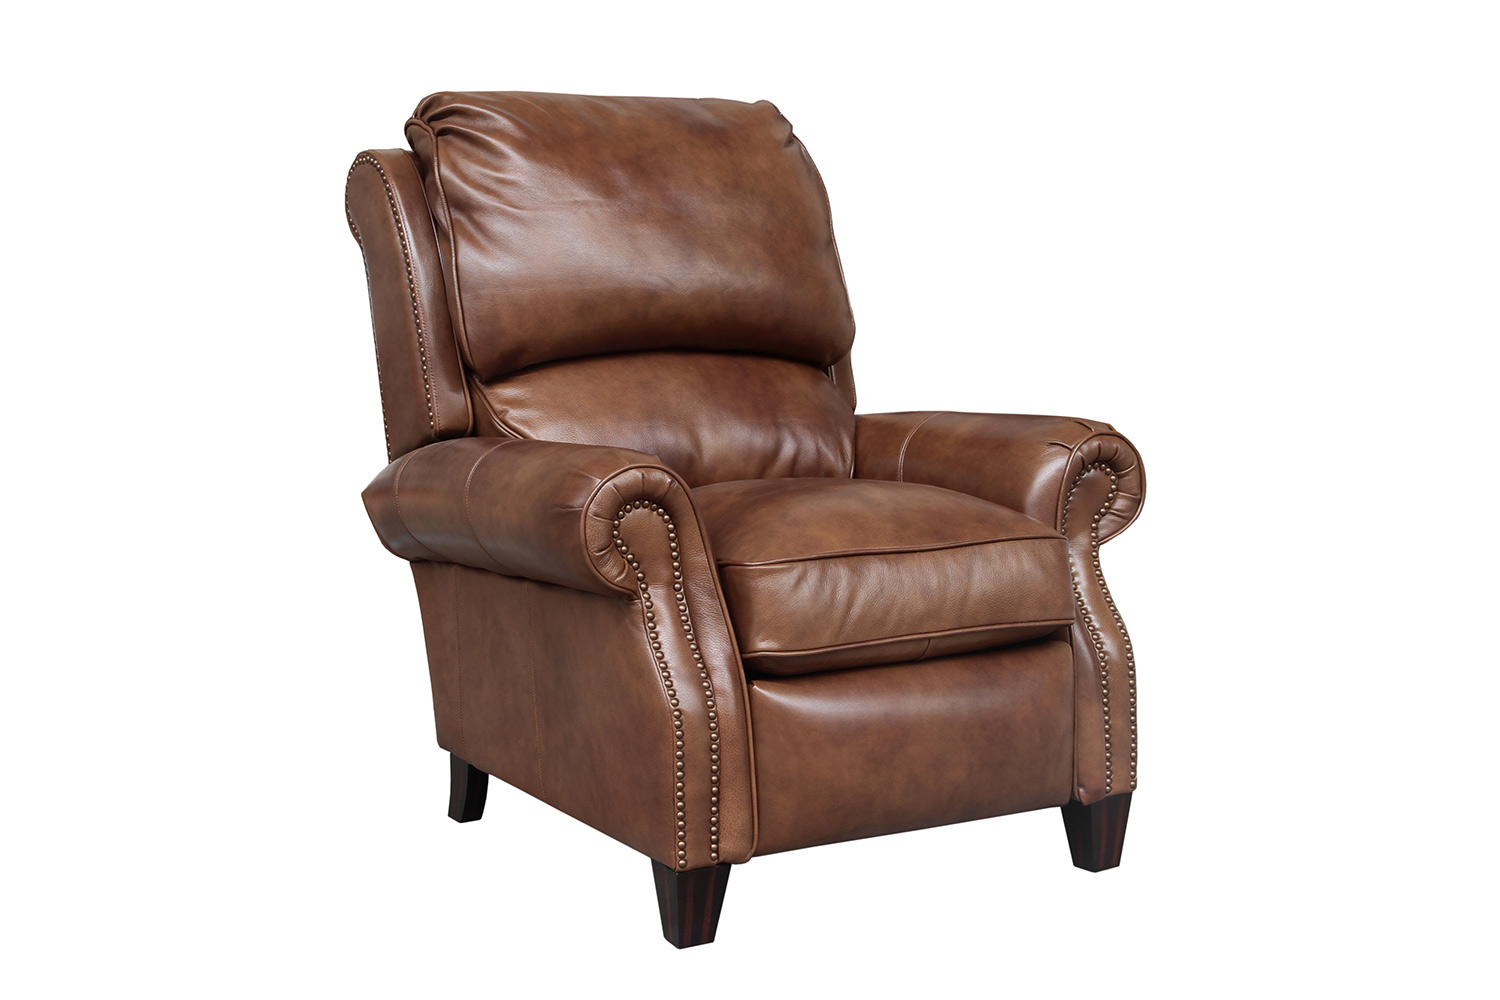 Barcalounger Churchill Recliner Chair - Wenlock Tawny/All Leather